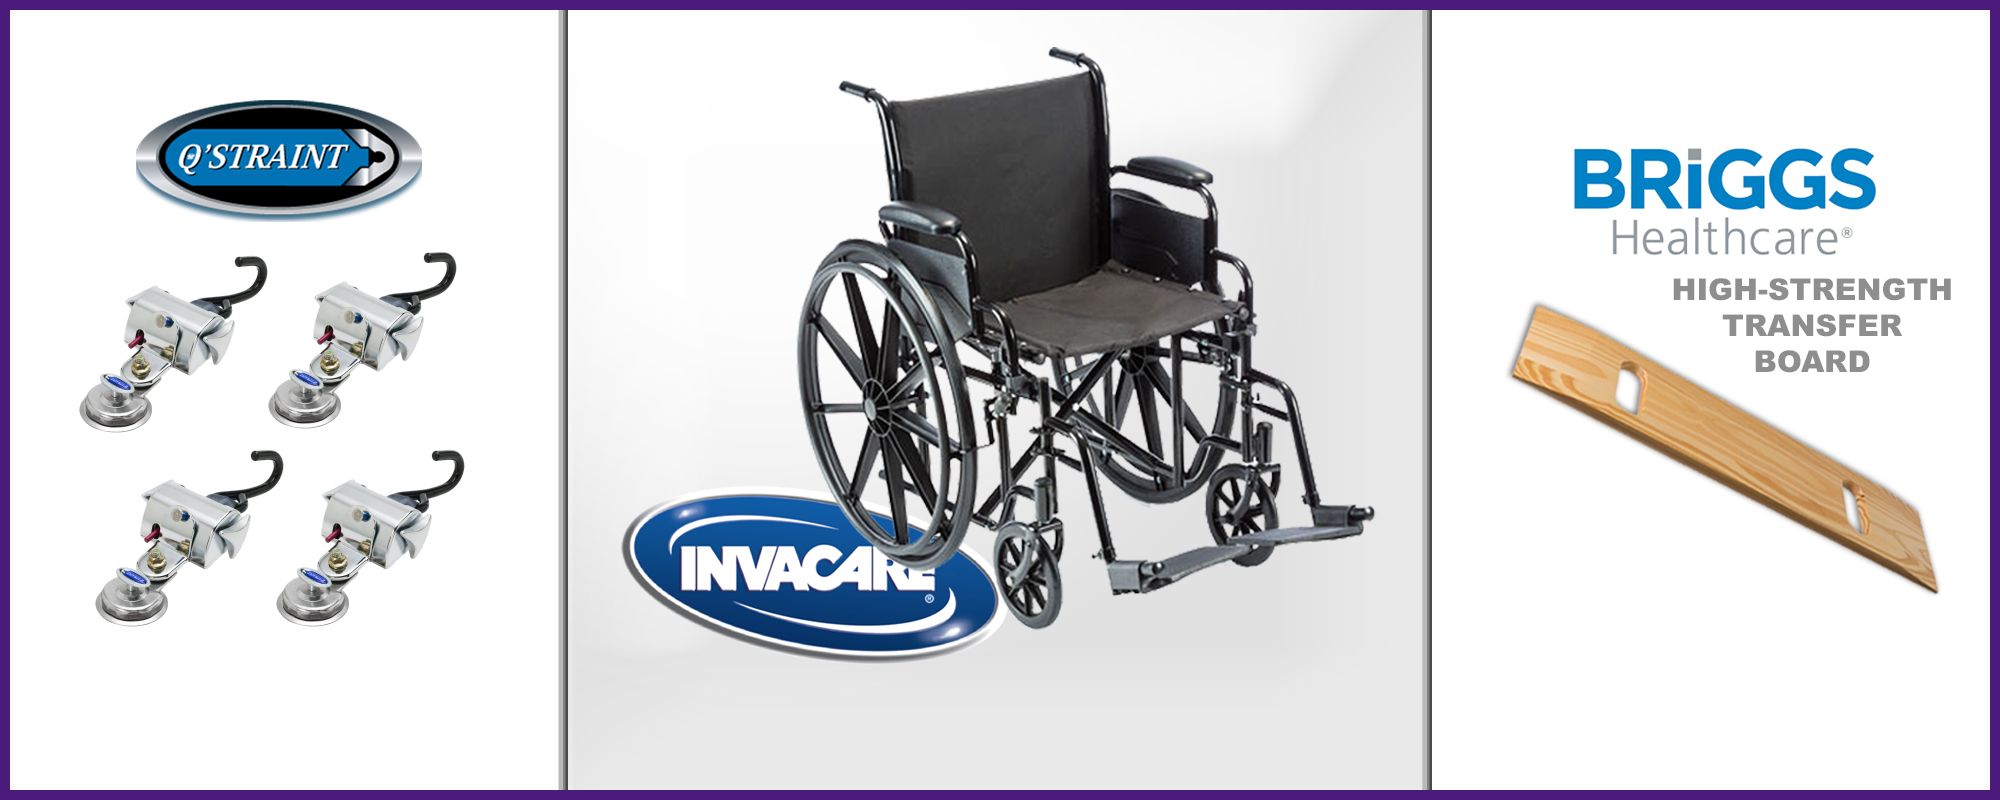 Williams Mobility uses only high-quality medical transportation equipment, including an Invacare wheelchair.